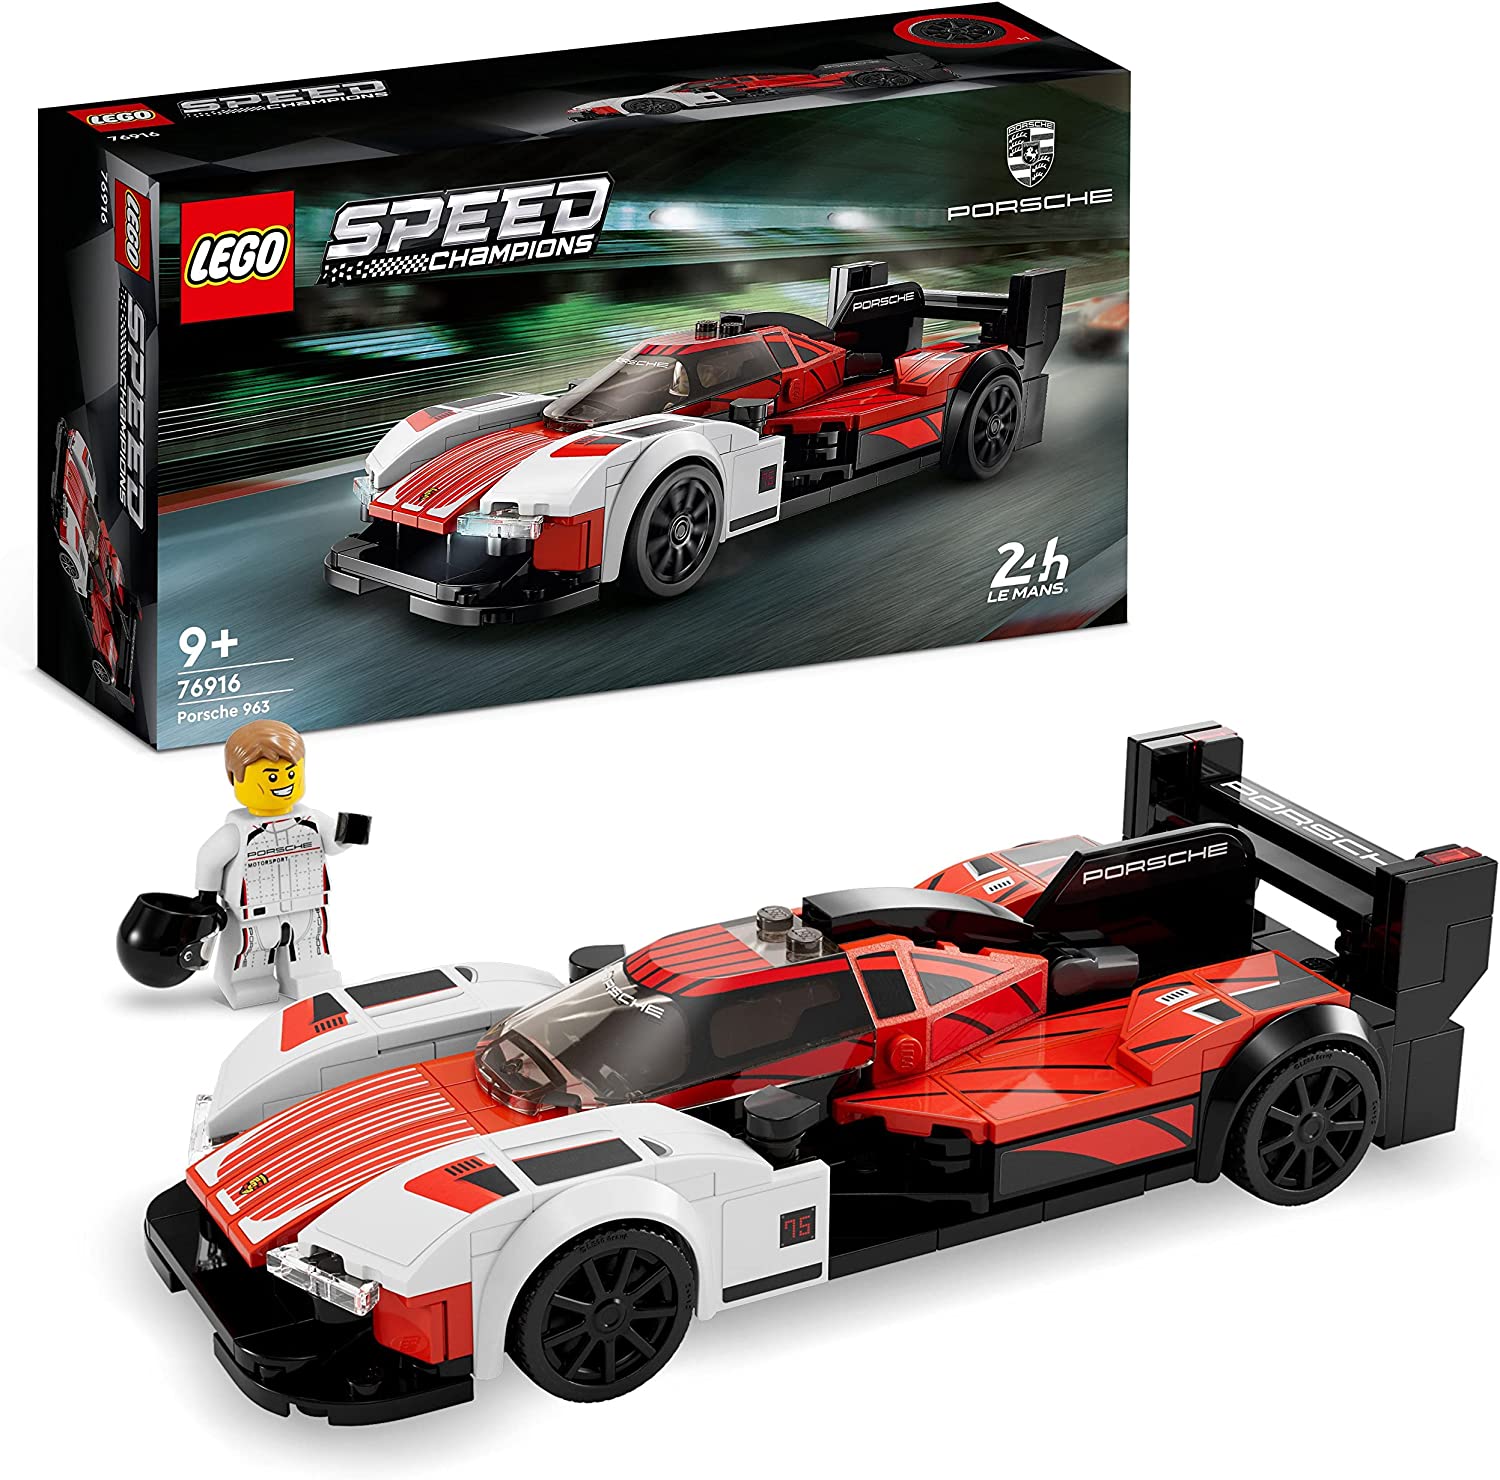 LEGO 76916 Speed ​​Champions Porsche 963 Model Car Building Kit, Racing Vehicle Toy for Kids, 2023 Collectible Set With Driver Mini Figure